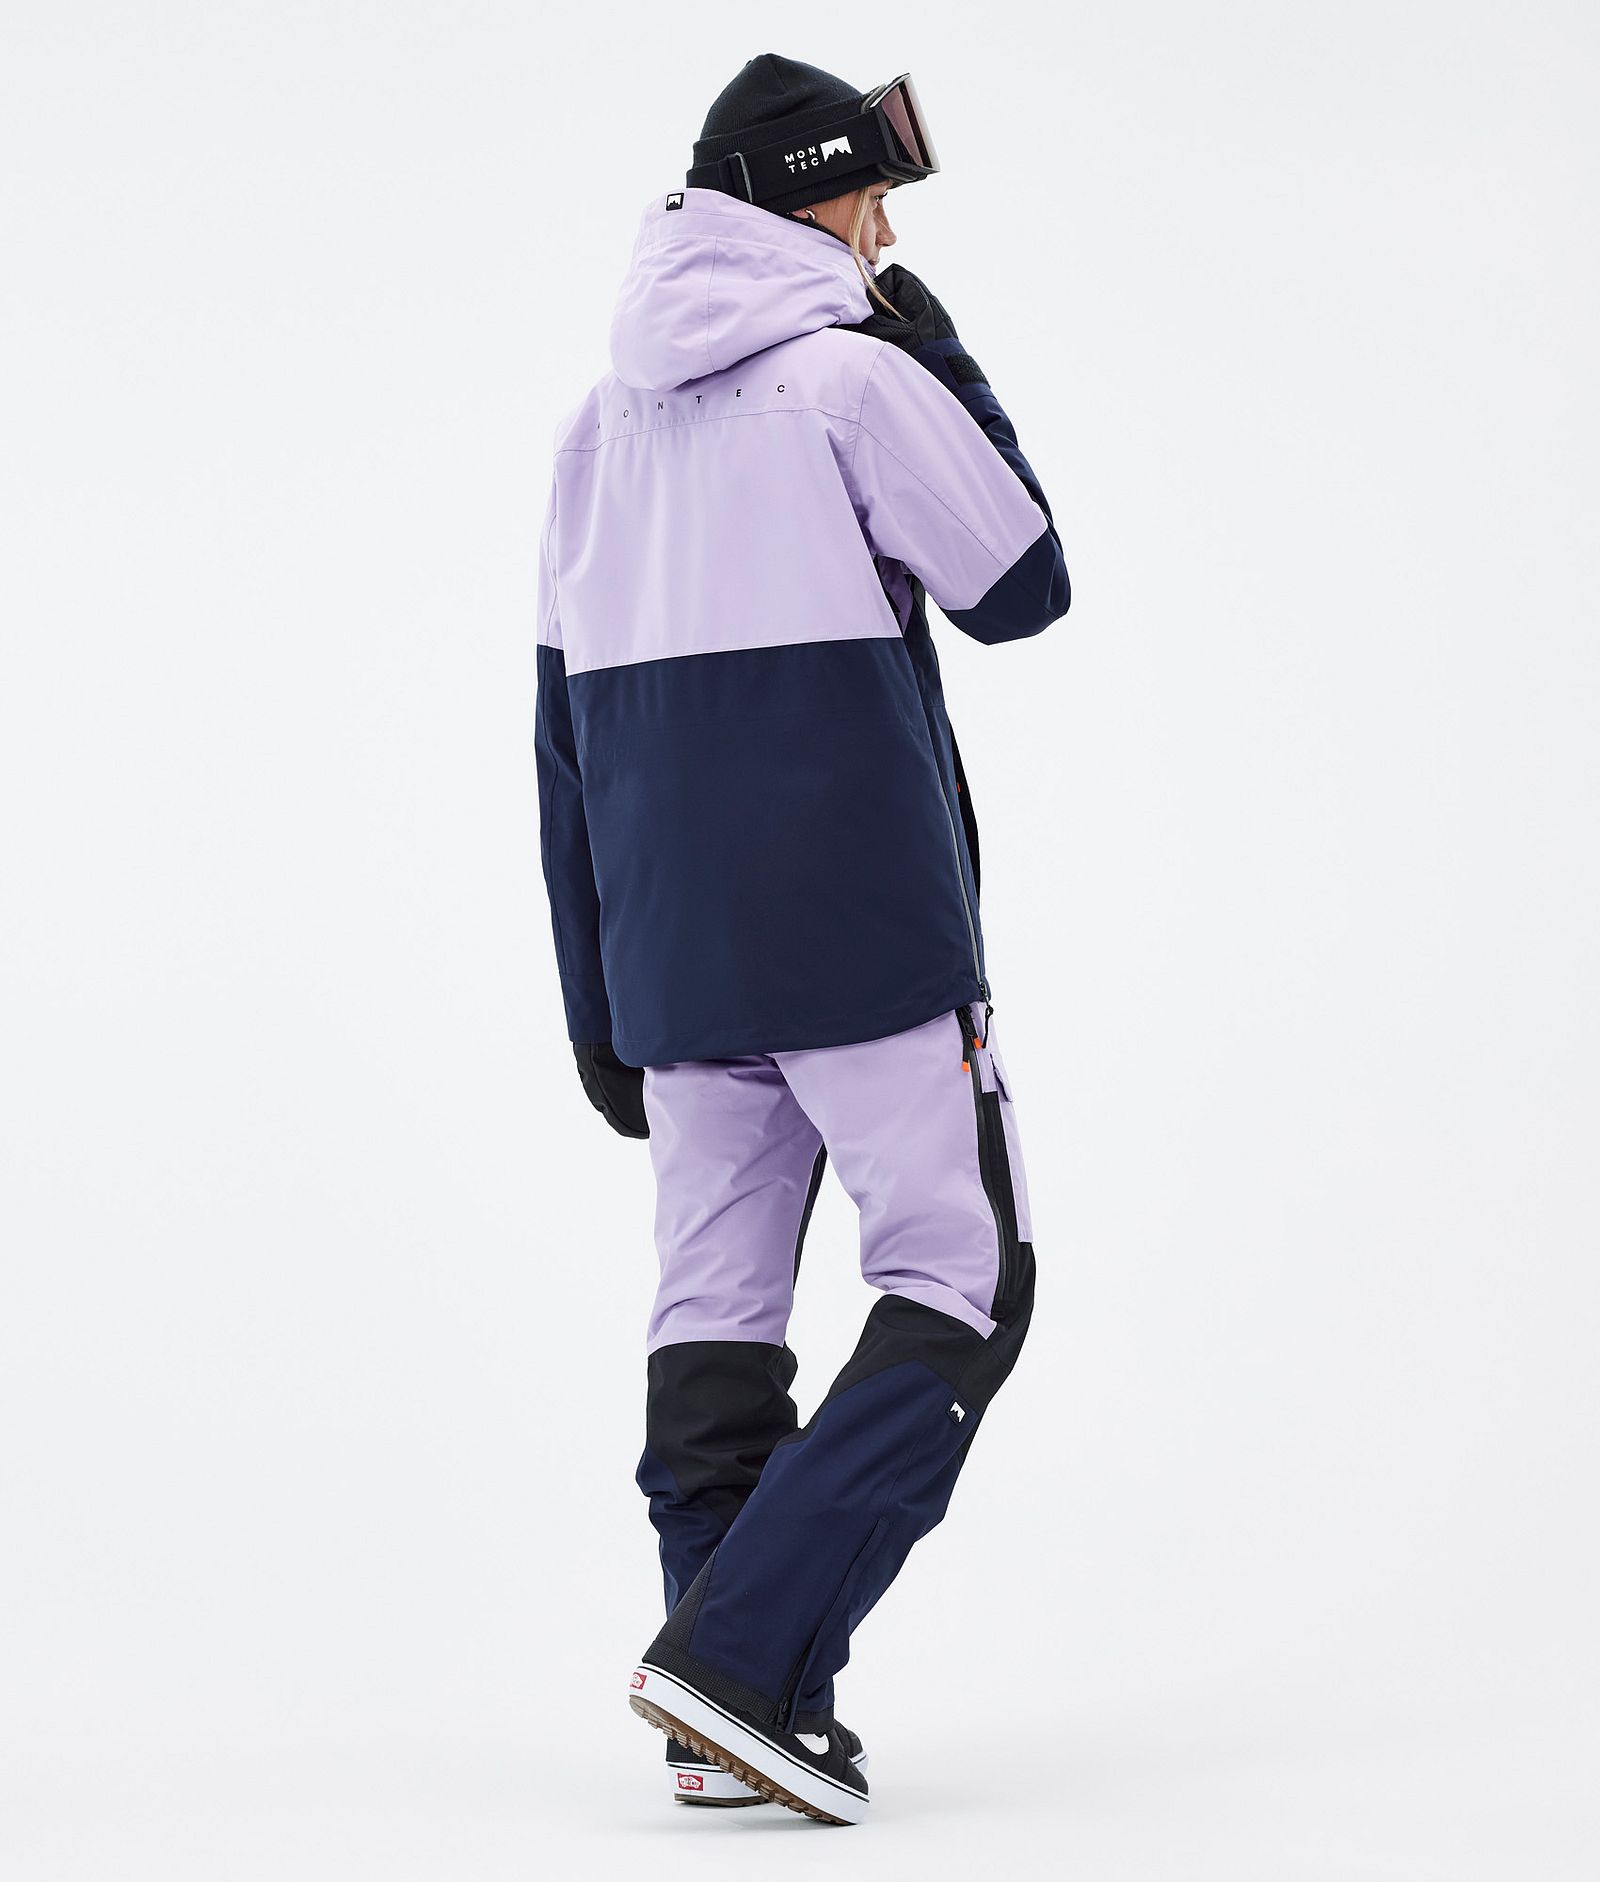 Dune W Snowboard Outfit Dame Faded Violet/Black/Dark Blue